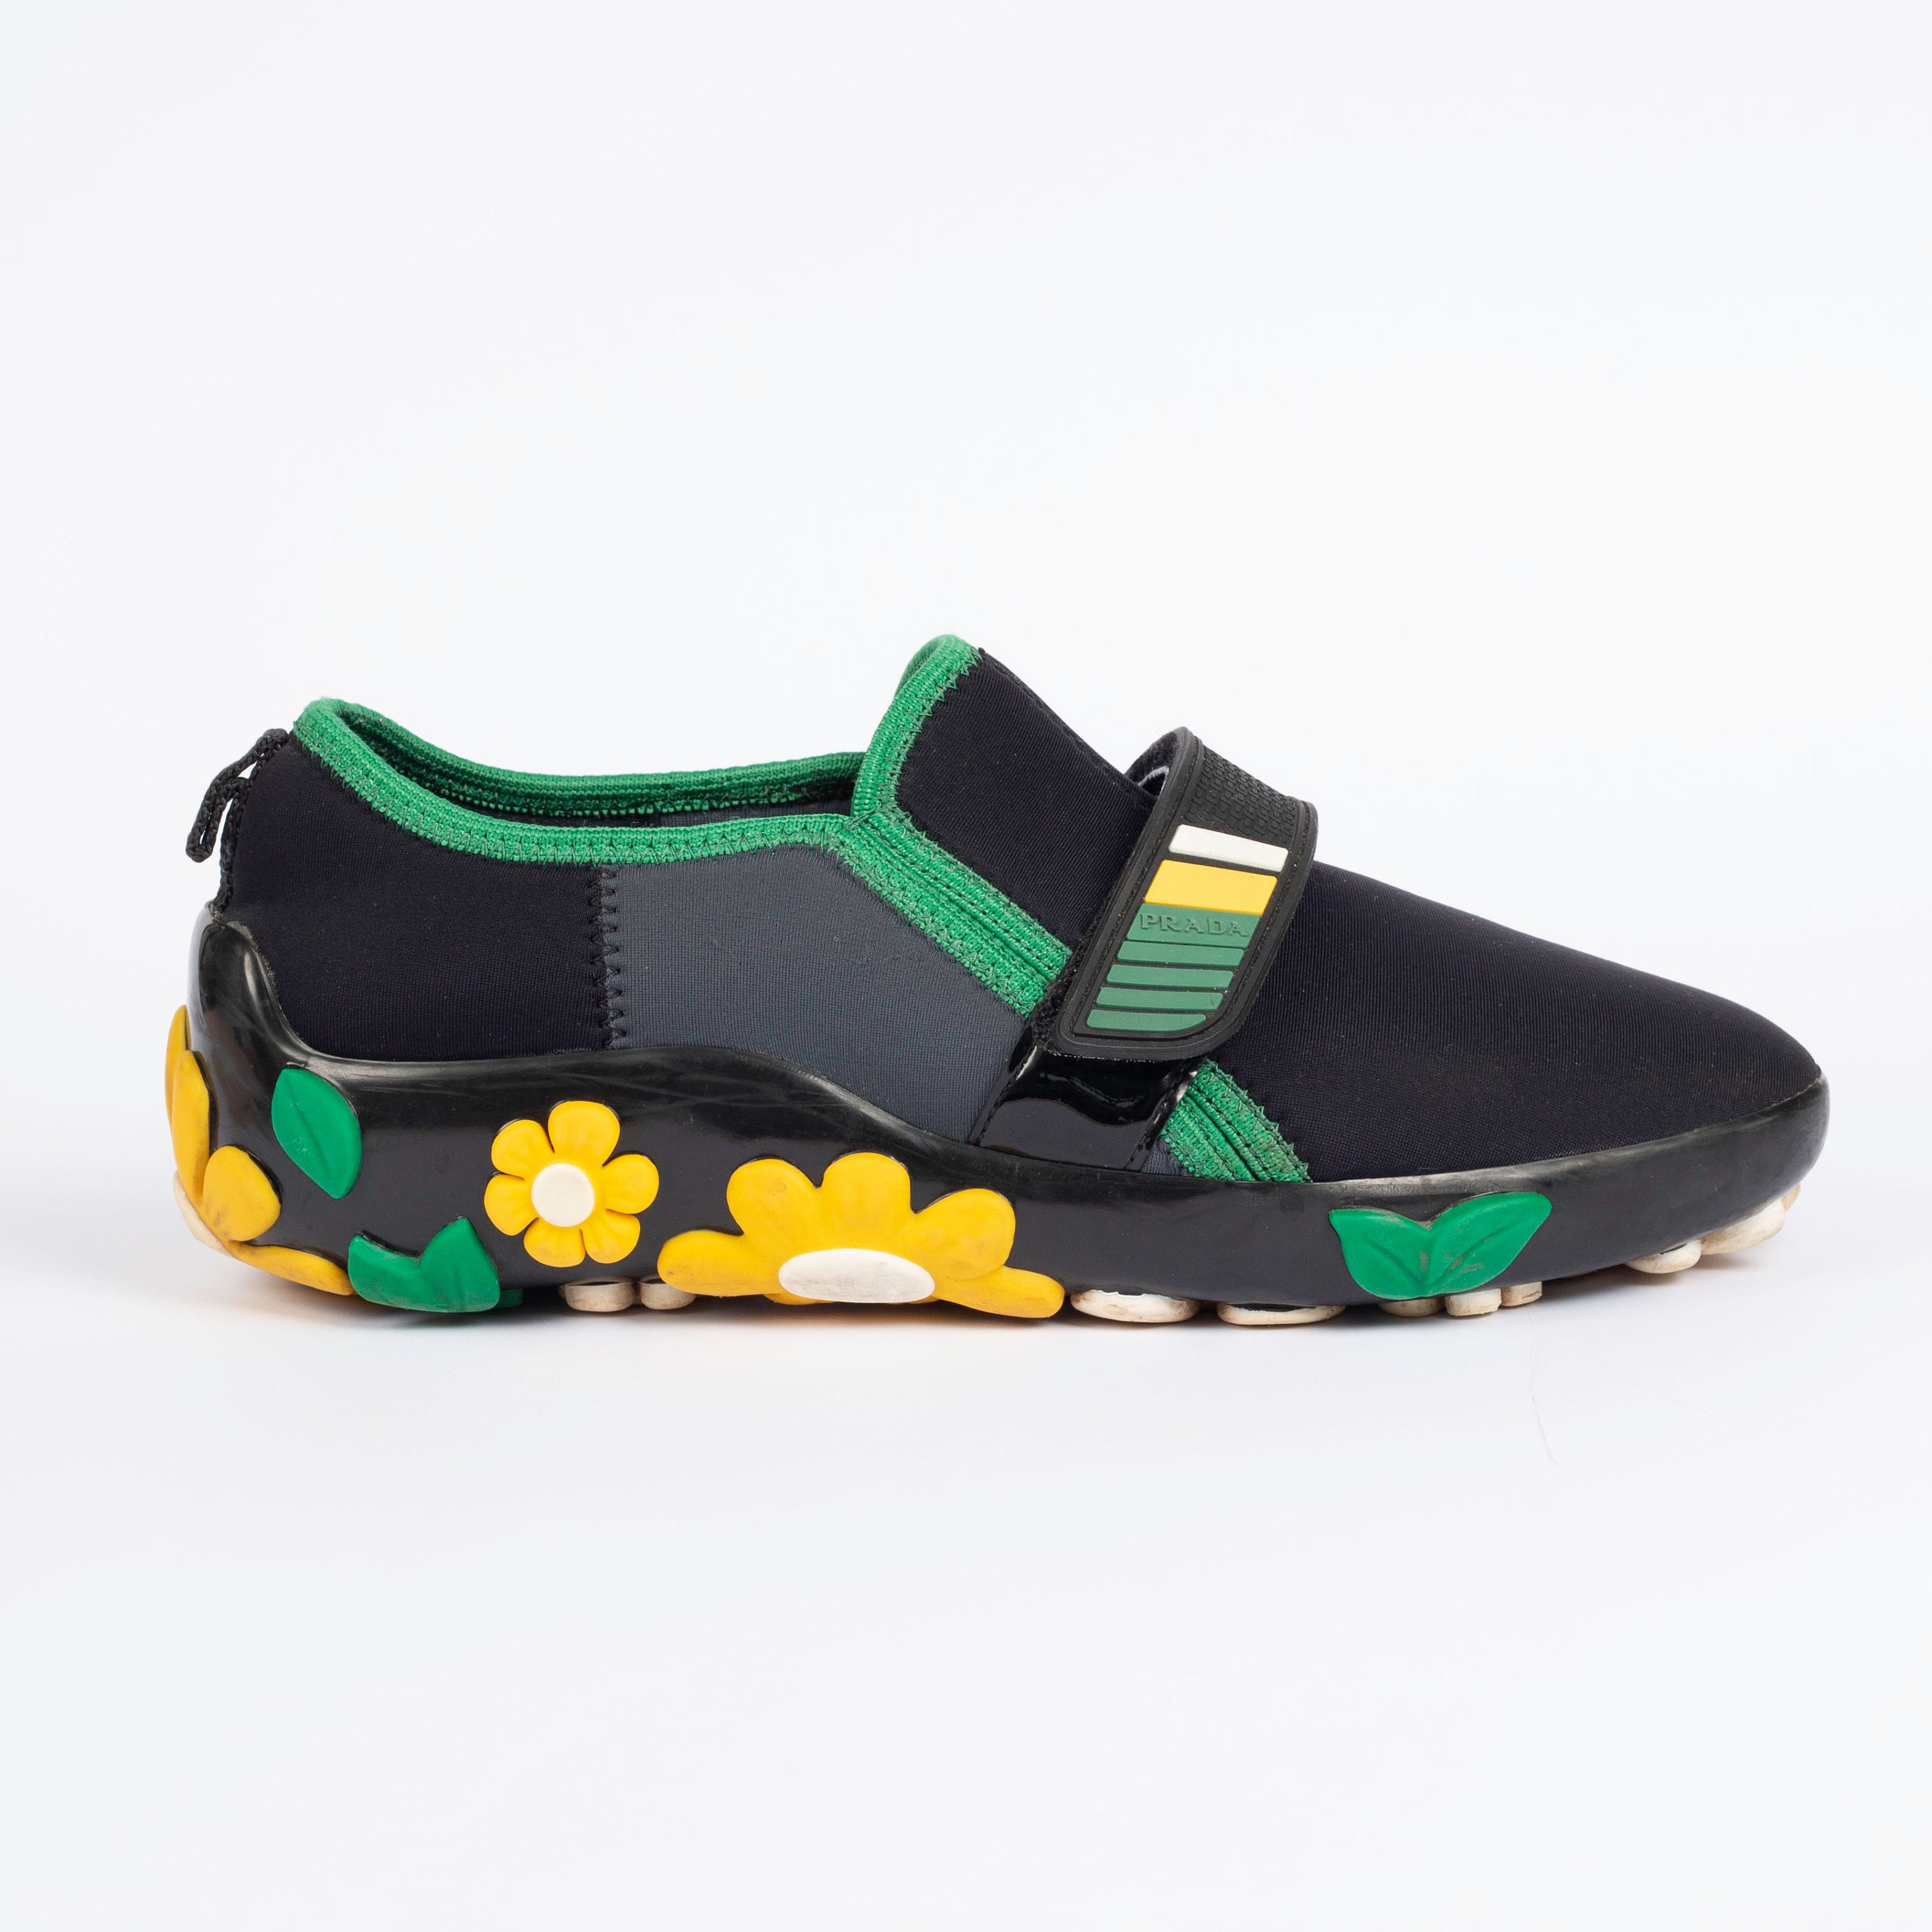 Prada Shoes Neoprene Flowery Floral Sneakers With Leather - Etsy